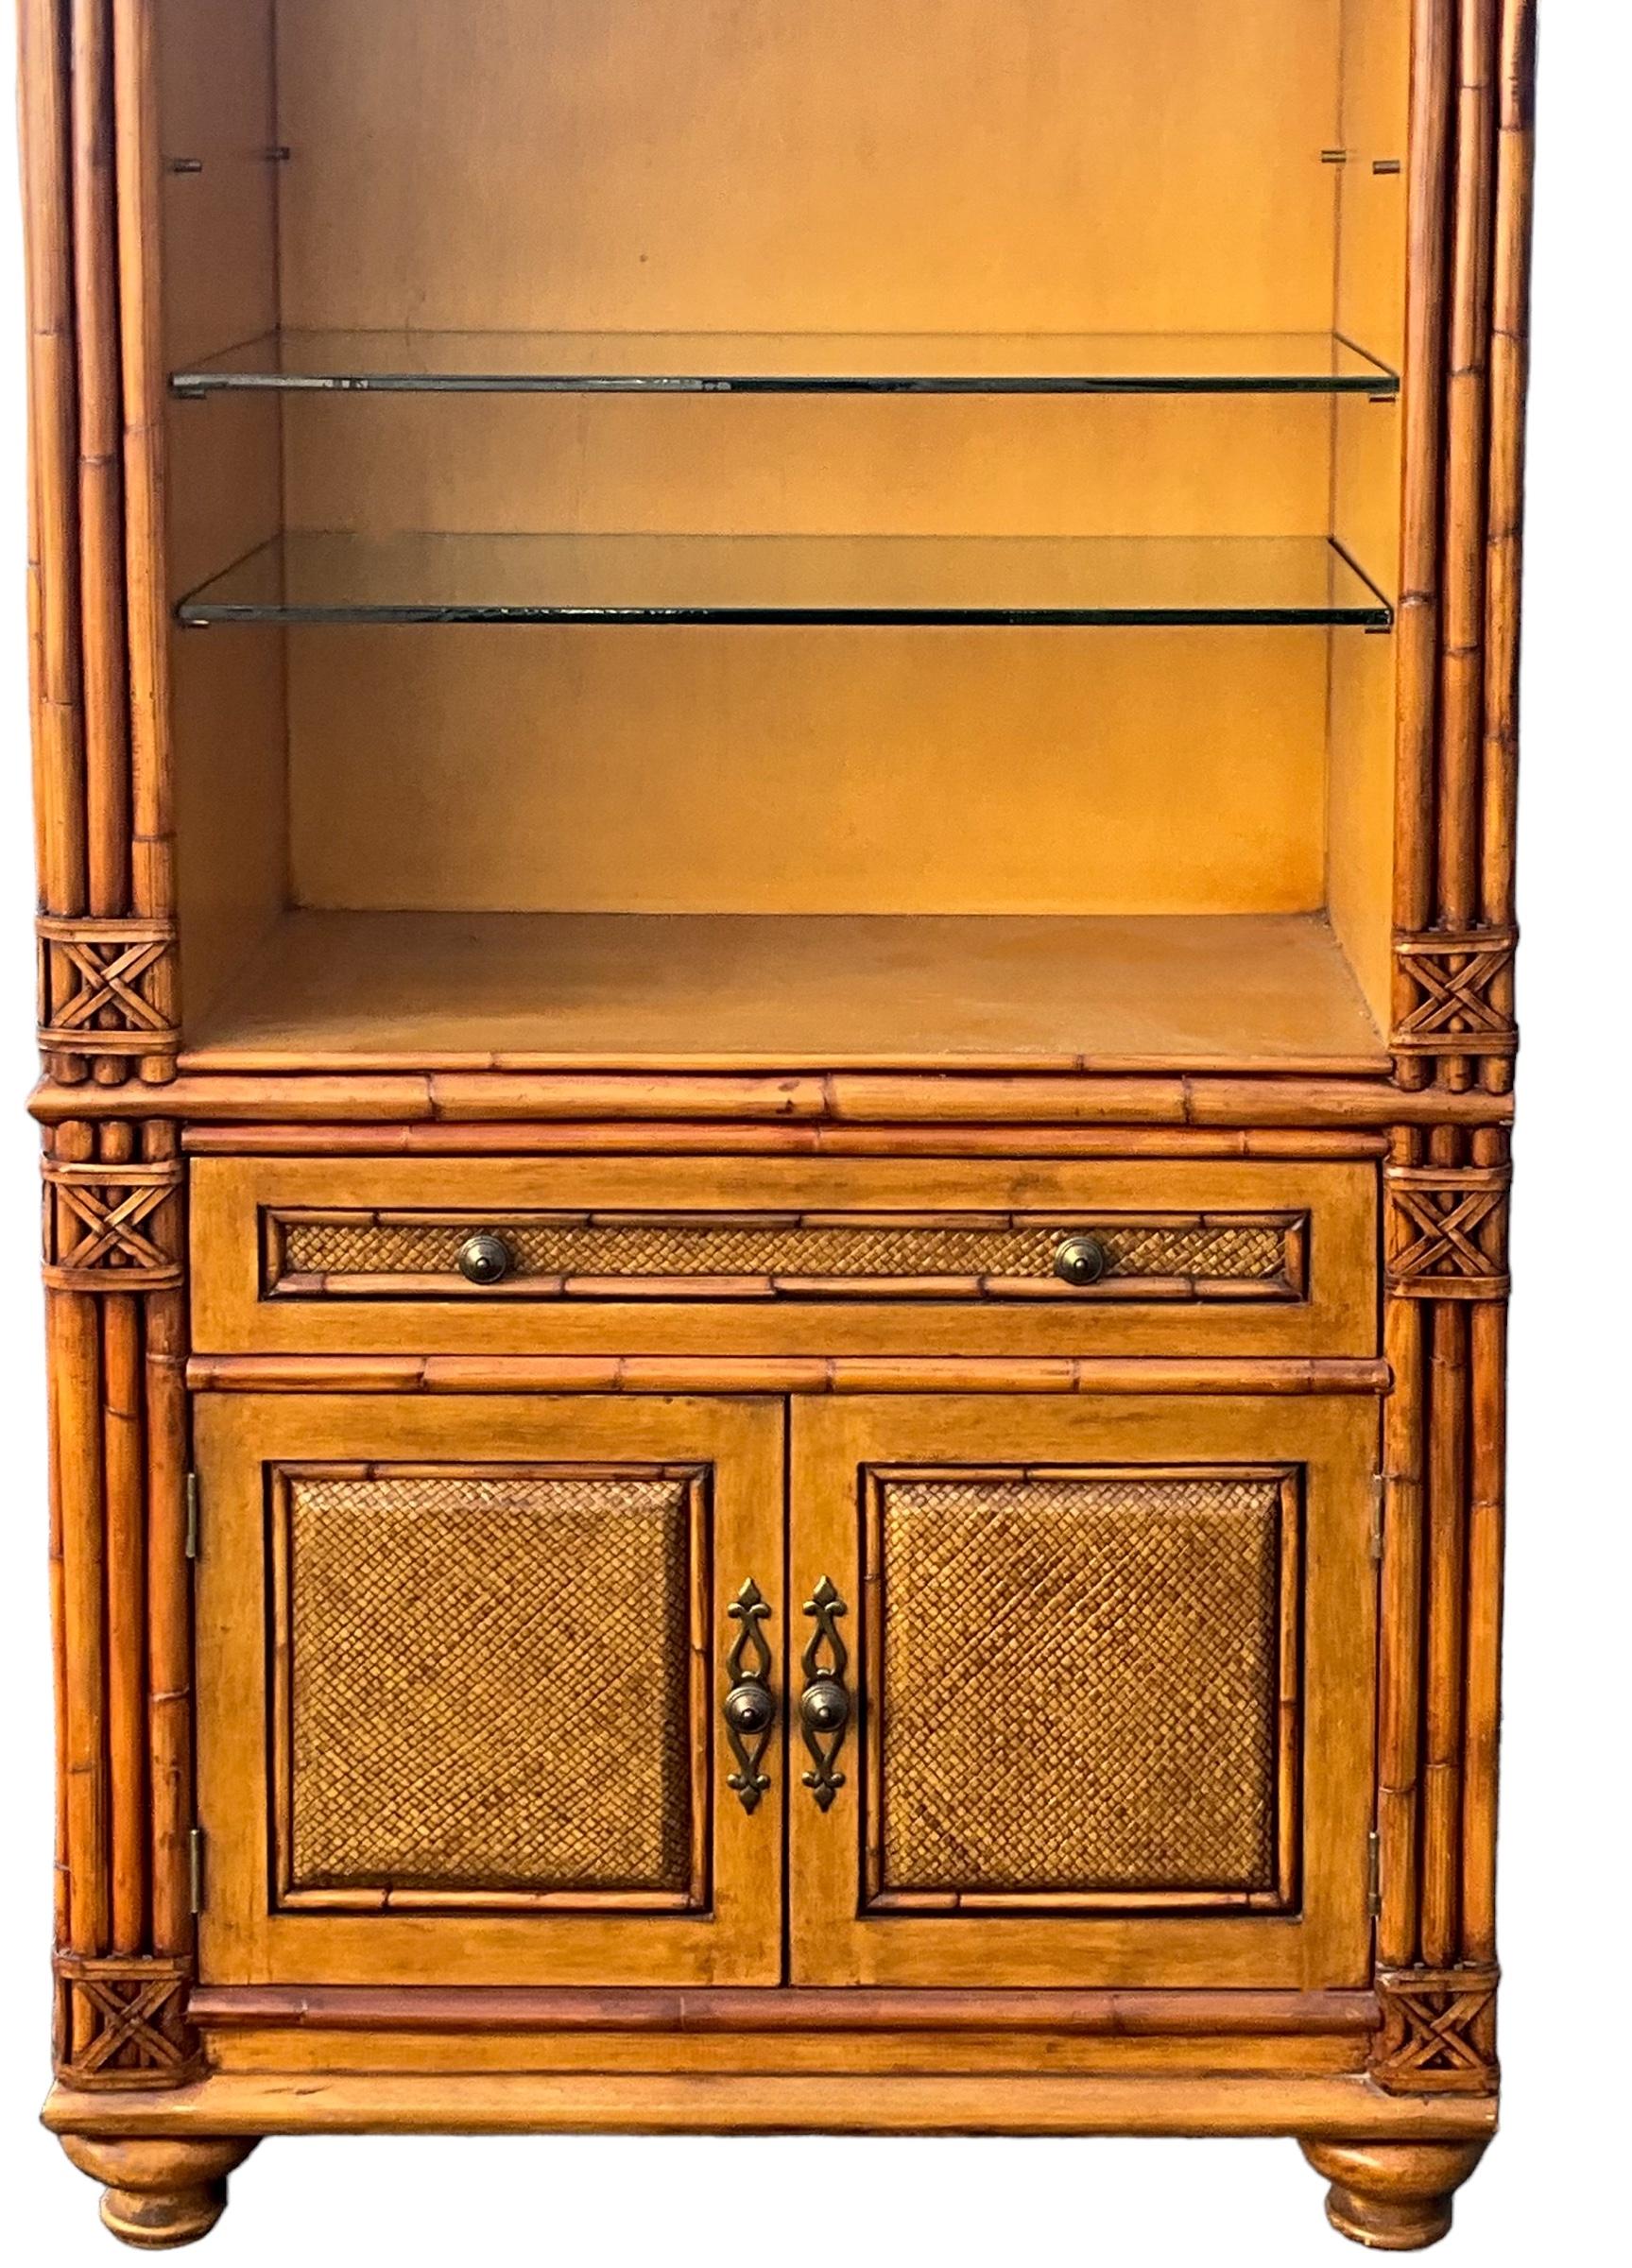 This is a set of regency style carved fruitwood faux bamboo style cabinets. They are able to be lit, and the glass shelves are adjustable. Each cabinet has a single drawer over two doors. The sides are a stained faux grasscloth. They are